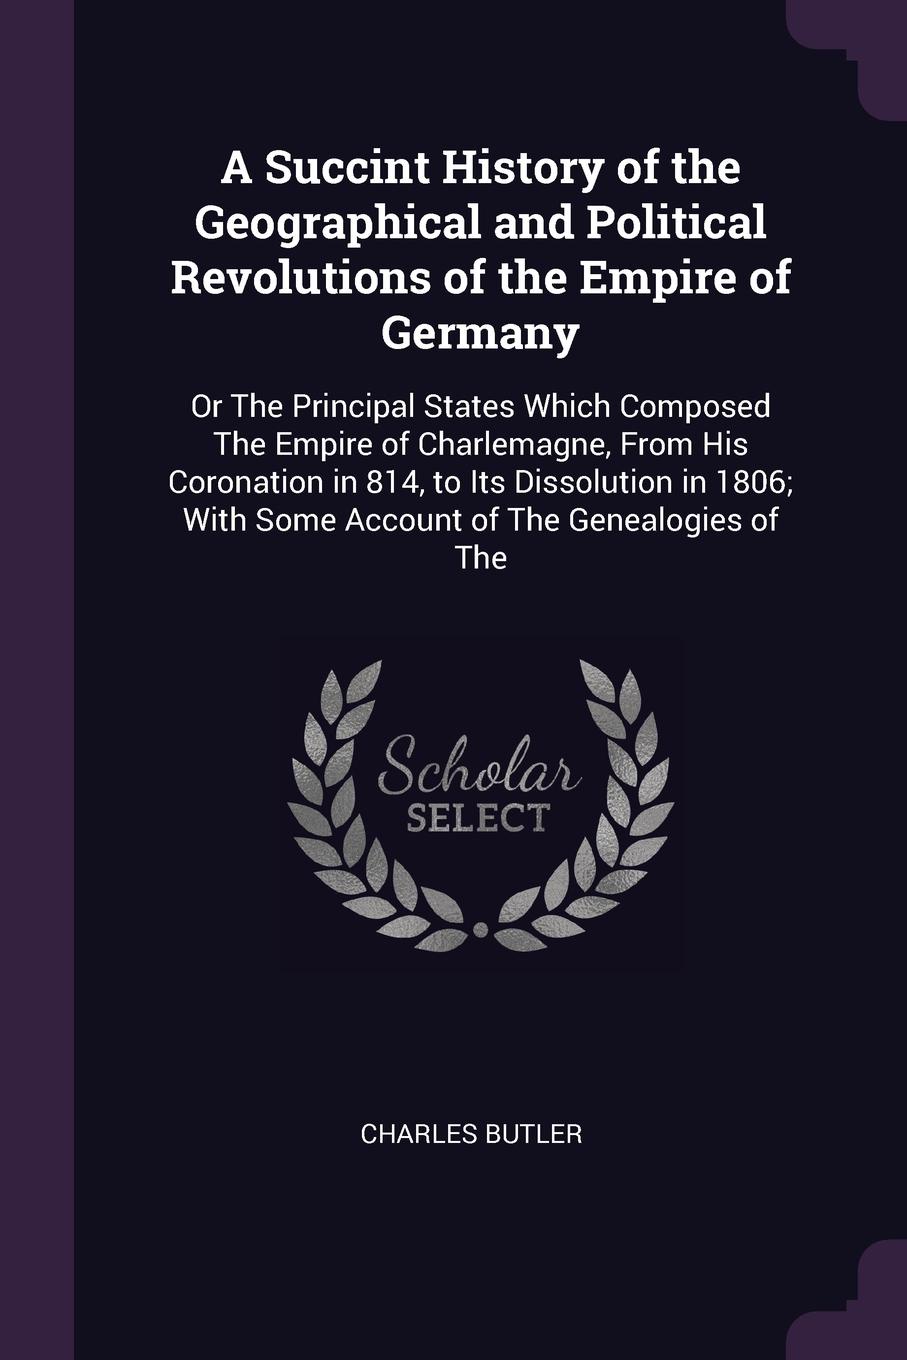 A Succint History of the Geographical and Political Revolutions of the Empire of Germany. Or The Principal States Which Composed The Empire of Charlemagne, From His Coronation in 814, to Its Dissolution in 1806; With Some Account of The Genealogie...